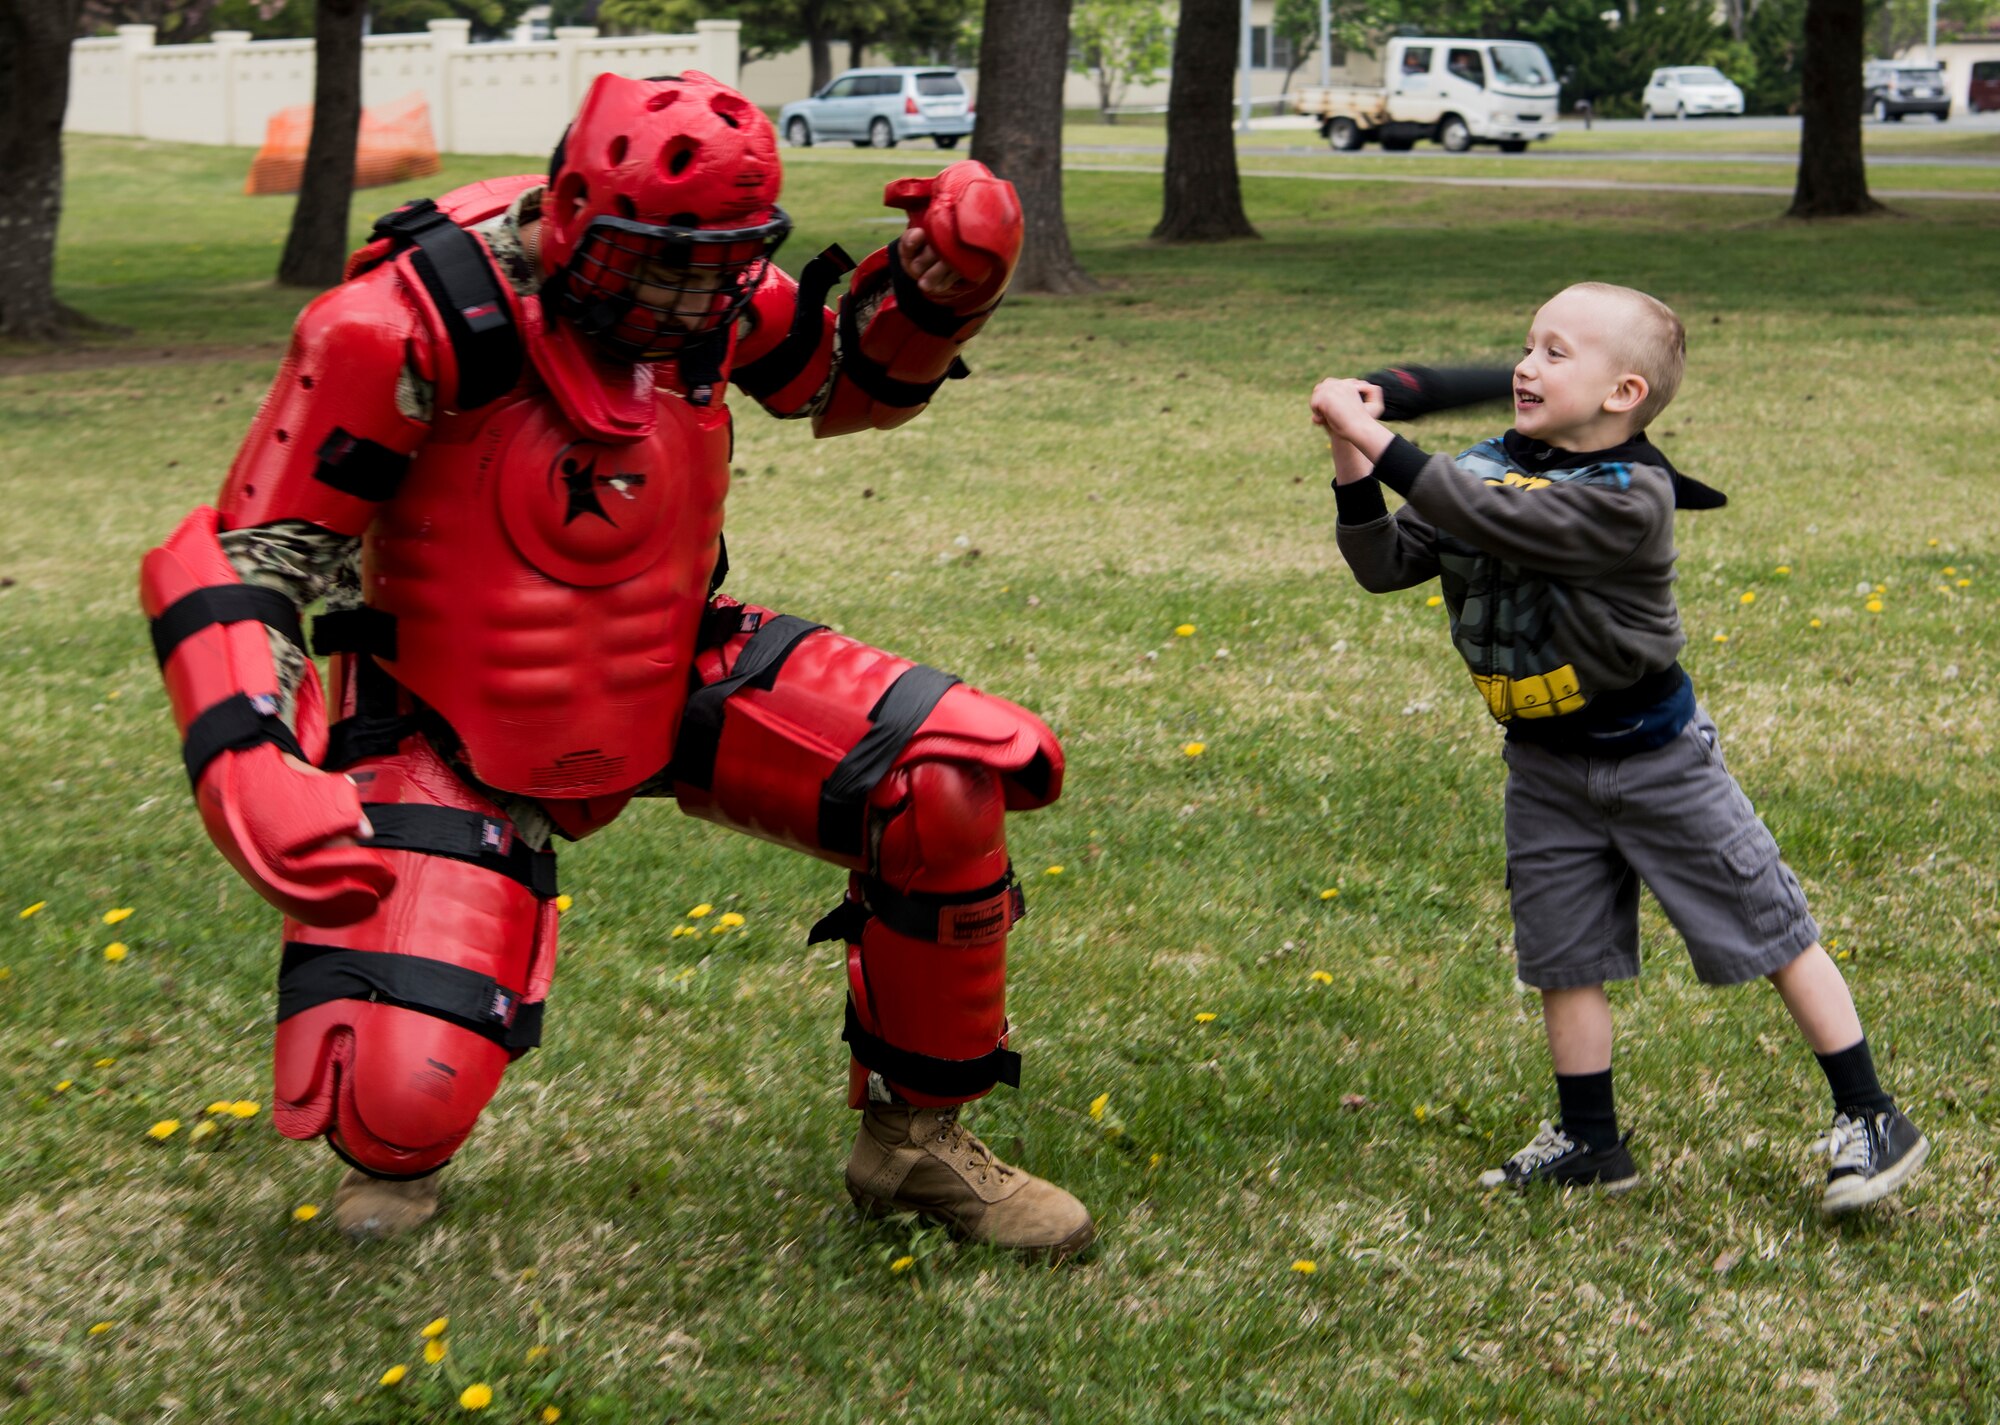 An attendee hits U.S. Navy Seaman Rodolfo Romero, a Naval Air Facility Far East Public Works Department construction mechanic and dressed as the "red man," during Police Week 2019 at Misawa Air Base, Japan, May 15, 2019. The red man training teaches how to use a baton in combat scenarios. The red man course also covers security forces concepts, operations, weapons safety, use of lethal or non-lethal force, communication procedures and vehicle searches. (U.S. Air Force photo by Airman 1st Class Xiomara M. Martinez)